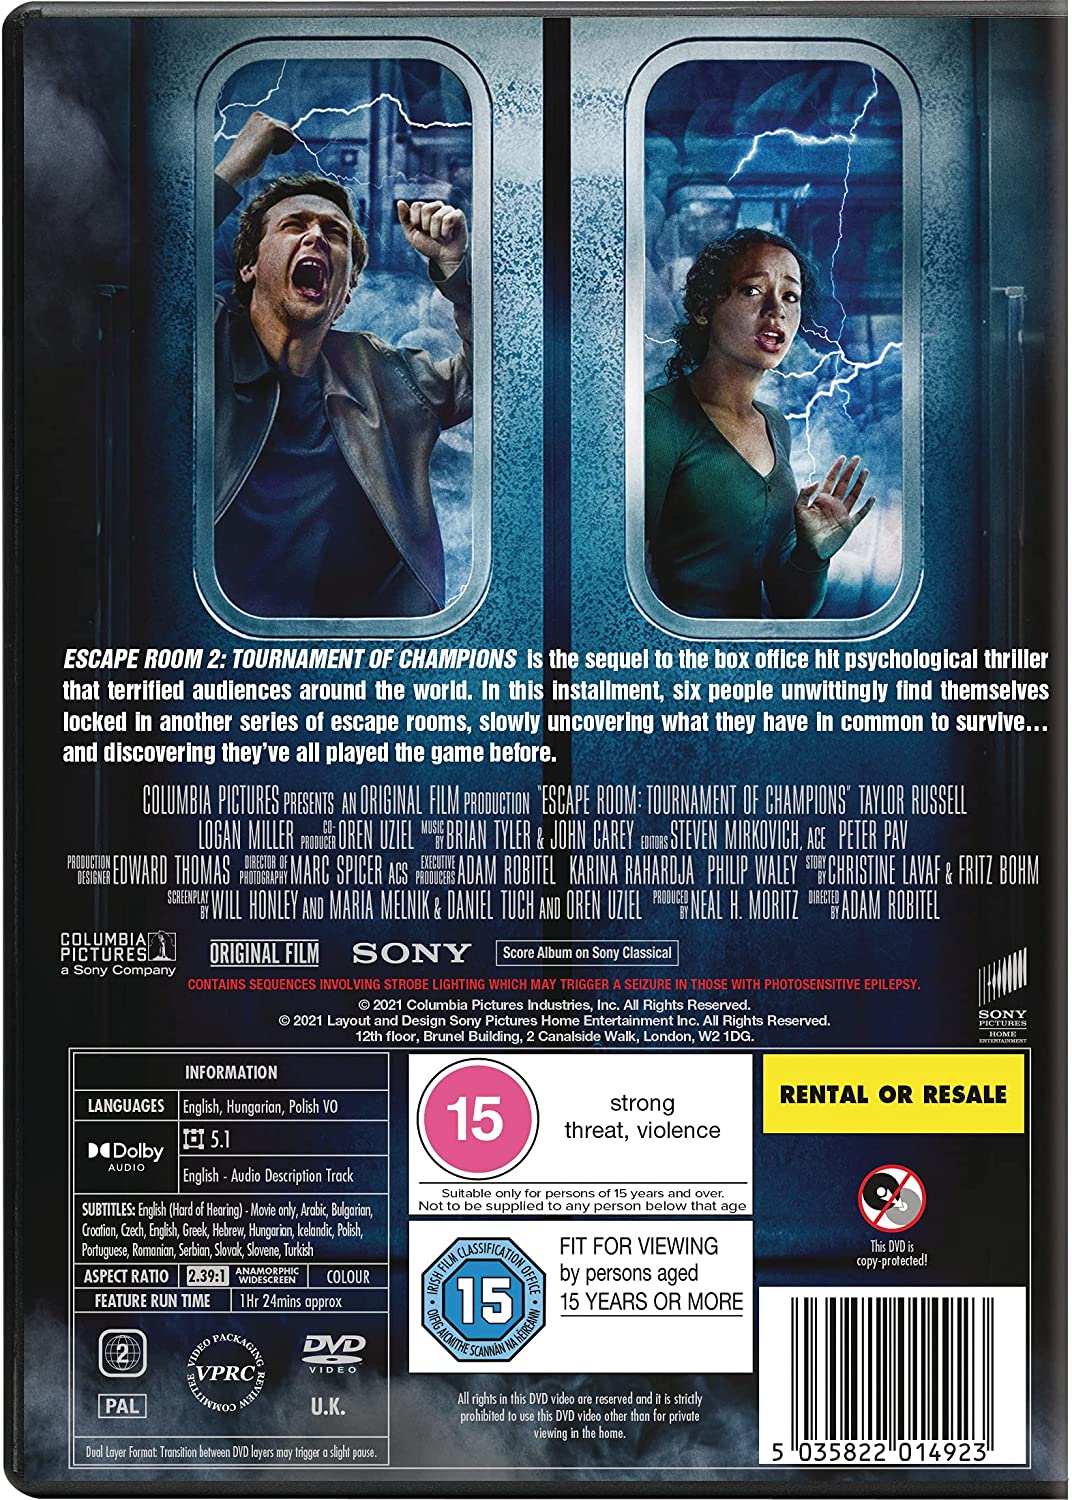 Escape Room 2: Tournament Of Champions - Thriller/Psychological horror [DVD]